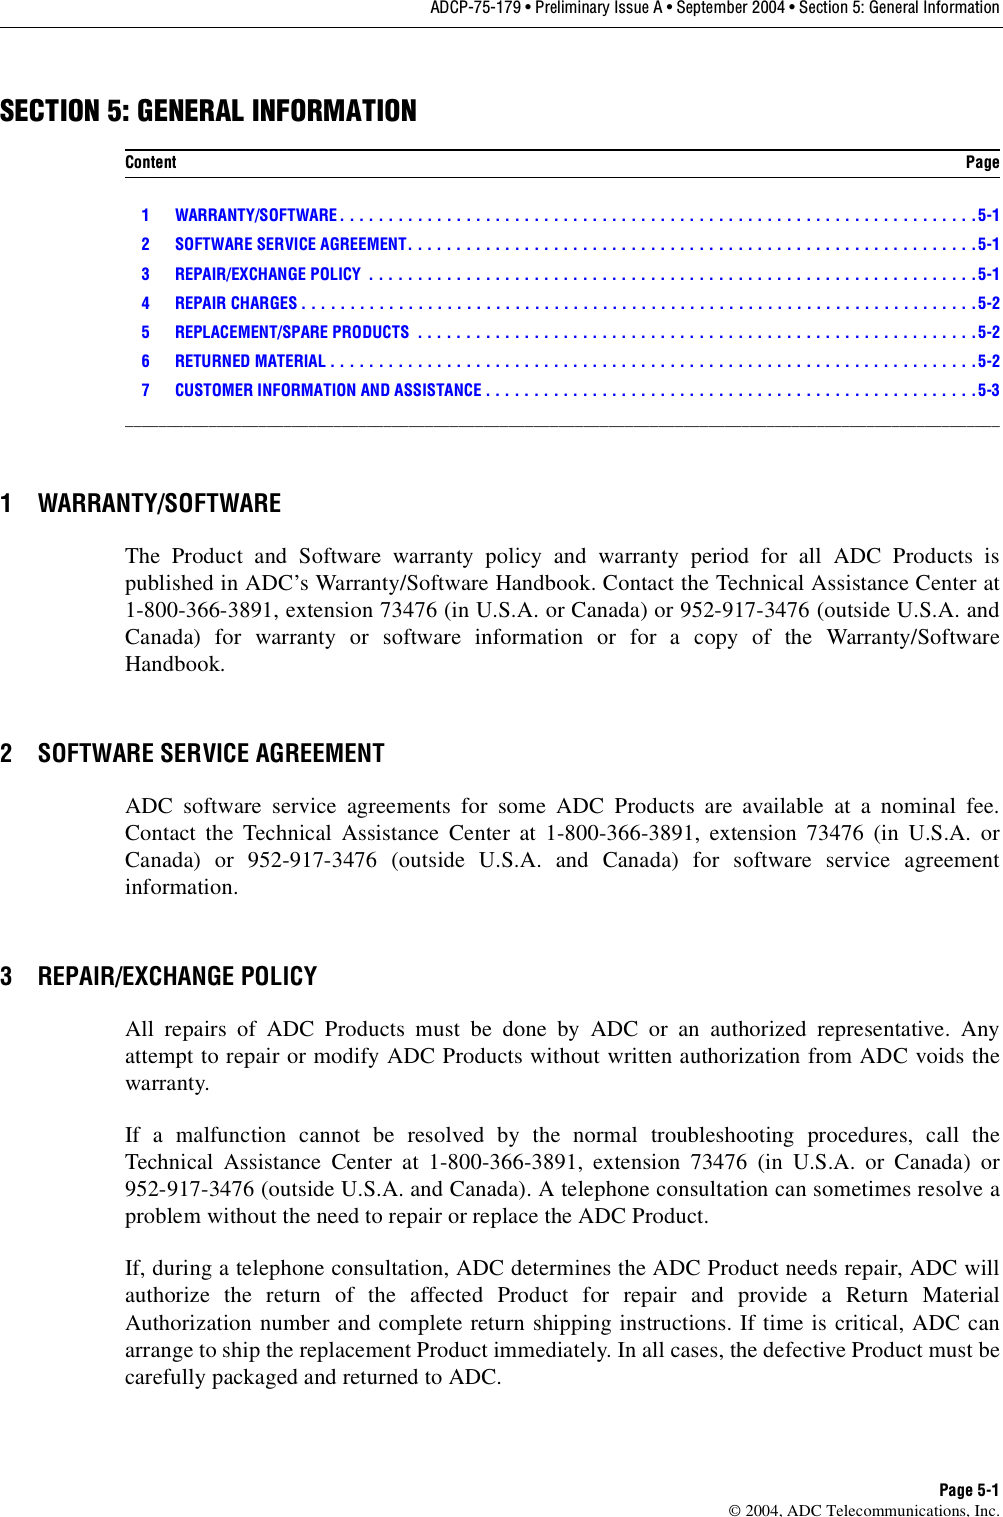 ADCP-75-179 • Preliminary Issue A • September 2004 • Section 5: General InformationPage 5-1© 2004, ADC Telecommunications, Inc.SECTION 5: GENERAL INFORMATION1 WARRANTY/SOFTWARE . . . . . . . . . . . . . . . . . . . . . . . . . . . . . . . . . . . . . . . . . . . . . . . . . . . . . . . . . . . . . . . . . .5-12 SOFTWARE SERVICE AGREEMENT. . . . . . . . . . . . . . . . . . . . . . . . . . . . . . . . . . . . . . . . . . . . . . . . . . . . . . . . . . .5-13 REPAIR/EXCHANGE POLICY  . . . . . . . . . . . . . . . . . . . . . . . . . . . . . . . . . . . . . . . . . . . . . . . . . . . . . . . . . . . . . . .5-14 REPAIR CHARGES . . . . . . . . . . . . . . . . . . . . . . . . . . . . . . . . . . . . . . . . . . . . . . . . . . . . . . . . . . . . . . . . . . . . . .5-25 REPLACEMENT/SPARE PRODUCTS  . . . . . . . . . . . . . . . . . . . . . . . . . . . . . . . . . . . . . . . . . . . . . . . . . . . . . . . . . .5-26 RETURNED MATERIAL . . . . . . . . . . . . . . . . . . . . . . . . . . . . . . . . . . . . . . . . . . . . . . . . . . . . . . . . . . . . . . . . . . .5-27 CUSTOMER INFORMATION AND ASSISTANCE . . . . . . . . . . . . . . . . . . . . . . . . . . . . . . . . . . . . . . . . . . . . . . . . . . .5-3_________________________________________________________________________________________________________1 WARRANTY/SOFTWAREThe Product and Software warranty policy and warranty period for all ADC Products ispublished in ADC’s Warranty/Software Handbook. Contact the Technical Assistance Center at1-800-366-3891, extension 73476 (in U.S.A. or Canada) or 952-917-3476 (outside U.S.A. andCanada) for warranty or software information or for a copy of the Warranty/SoftwareHandbook.2 SOFTWARE SERVICE AGREEMENTADC software service agreements for some ADC Products are available at a nominal fee.Contact the Technical Assistance Center at 1-800-366-3891, extension 73476 (in U.S.A. orCanada) or 952-917-3476 (outside U.S.A. and Canada) for software service agreementinformation.3 REPAIR/EXCHANGE POLICYAll repairs of ADC Products must be done by ADC or an authorized representative. Anyattempt to repair or modify ADC Products without written authorization from ADC voids thewarranty.If a malfunction cannot be resolved by the normal troubleshooting procedures, call theTechnical Assistance Center at 1-800-366-3891, extension 73476 (in U.S.A. or Canada) or952-917-3476 (outside U.S.A. and Canada). A telephone consultation can sometimes resolve aproblem without the need to repair or replace the ADC Product.If, during a telephone consultation, ADC determines the ADC Product needs repair, ADC willauthorize the return of the affected Product for repair and provide a Return MaterialAuthorization number and complete return shipping instructions. If time is critical, ADC canarrange to ship the replacement Product immediately. In all cases, the defective Product must becarefully packaged and returned to ADC.Content Page